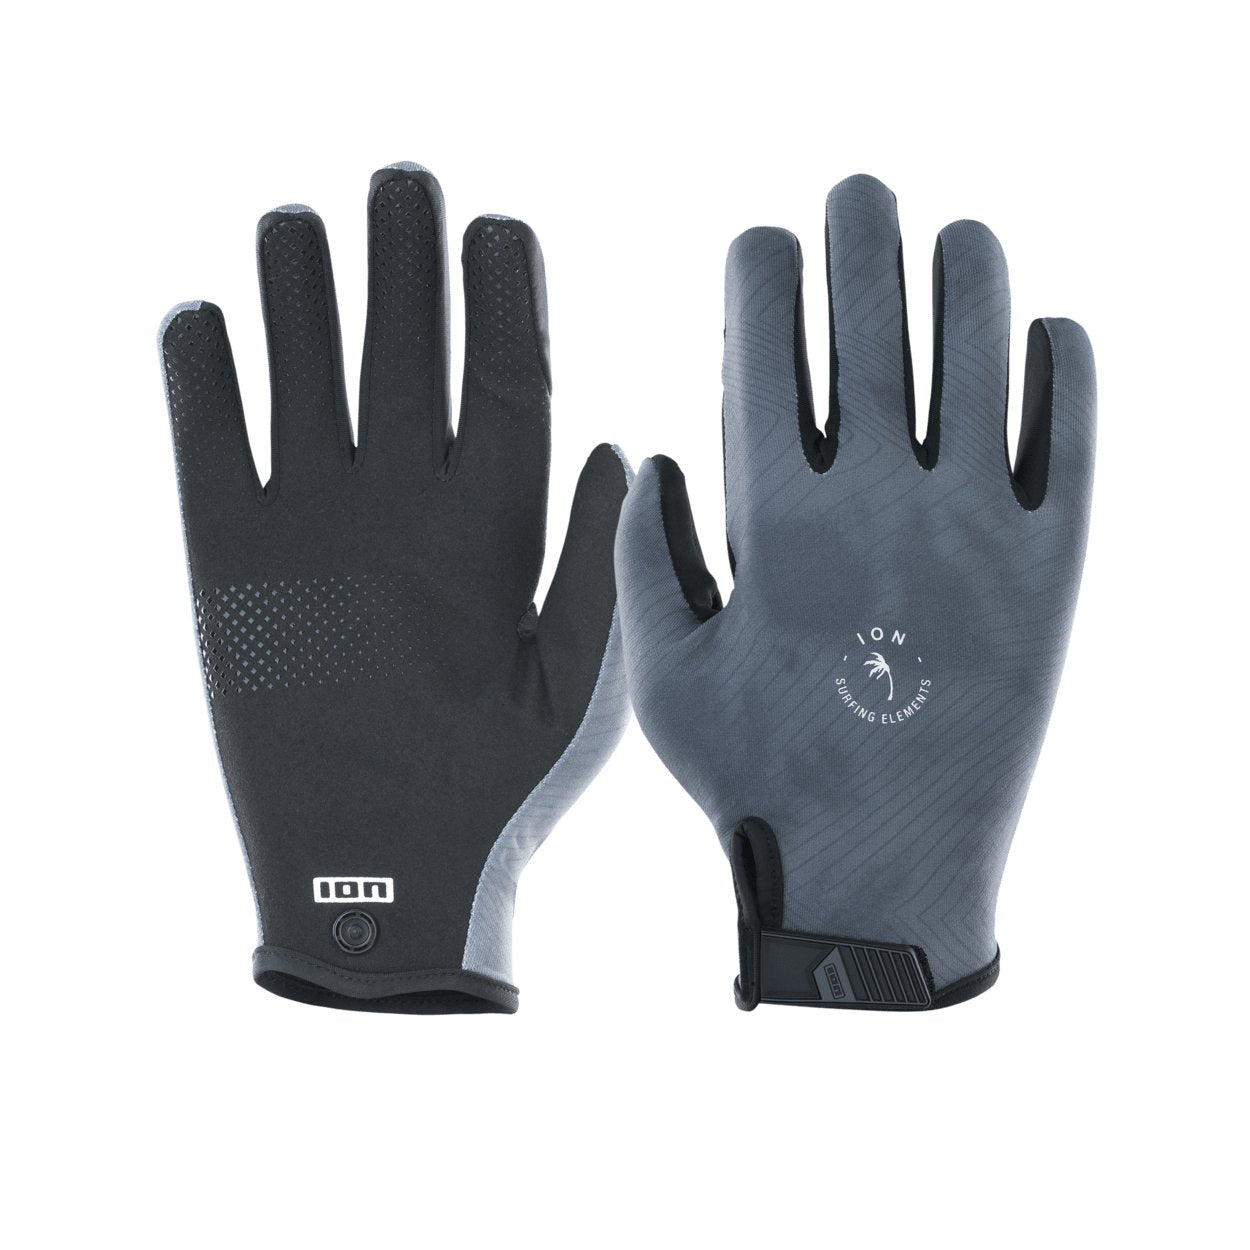 ION Gloves Amara Full Finger unisex 2023 - Worthing Watersports - 9010583128405 - Neo Accessories - ION Water